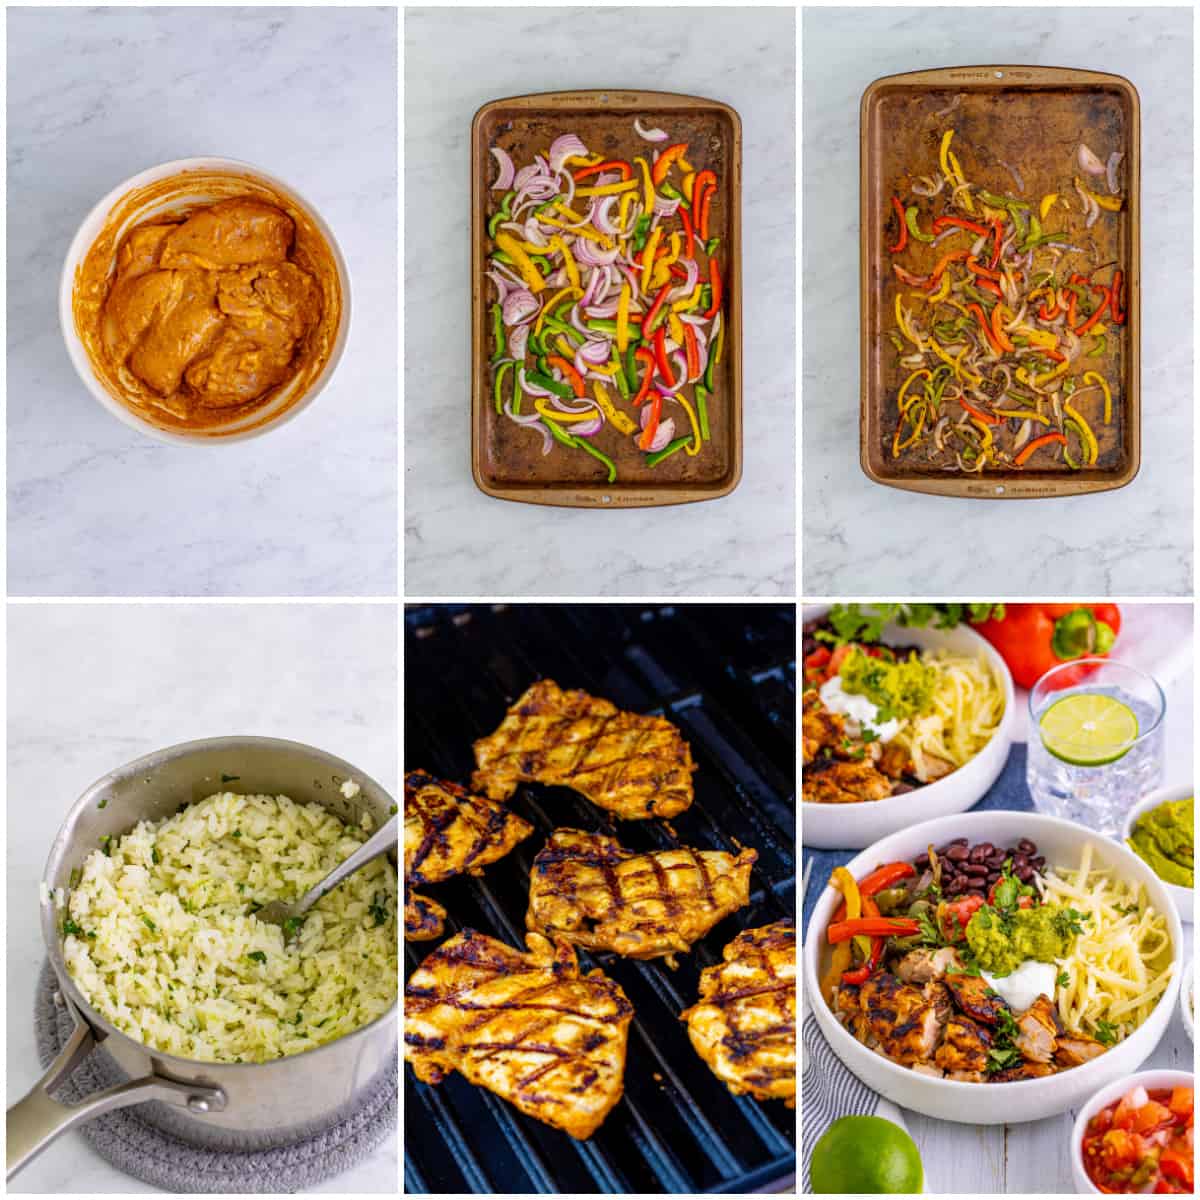 Step by step photos on how to make Chicken Burrito Bowls.